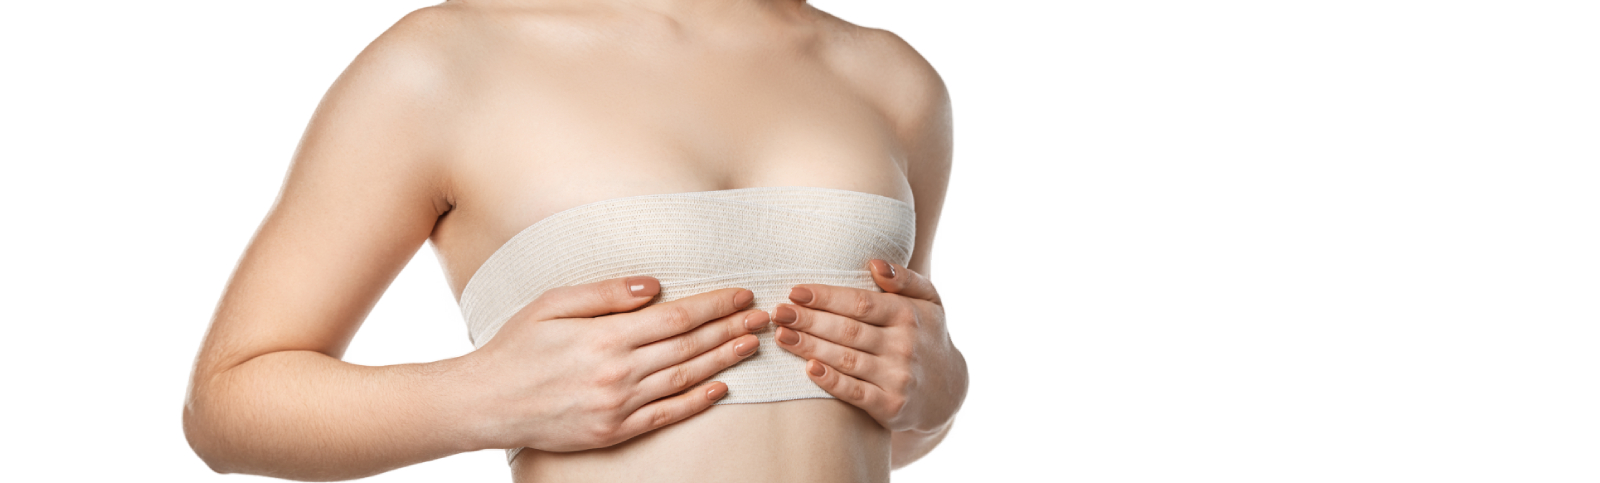 Plastic Surgery Center of Hampton Roads - Millions of women worldwide are  uncomfortable with the size, shape, and appearance of their breasts. The  most common issue is uneven breasts. Learn how our